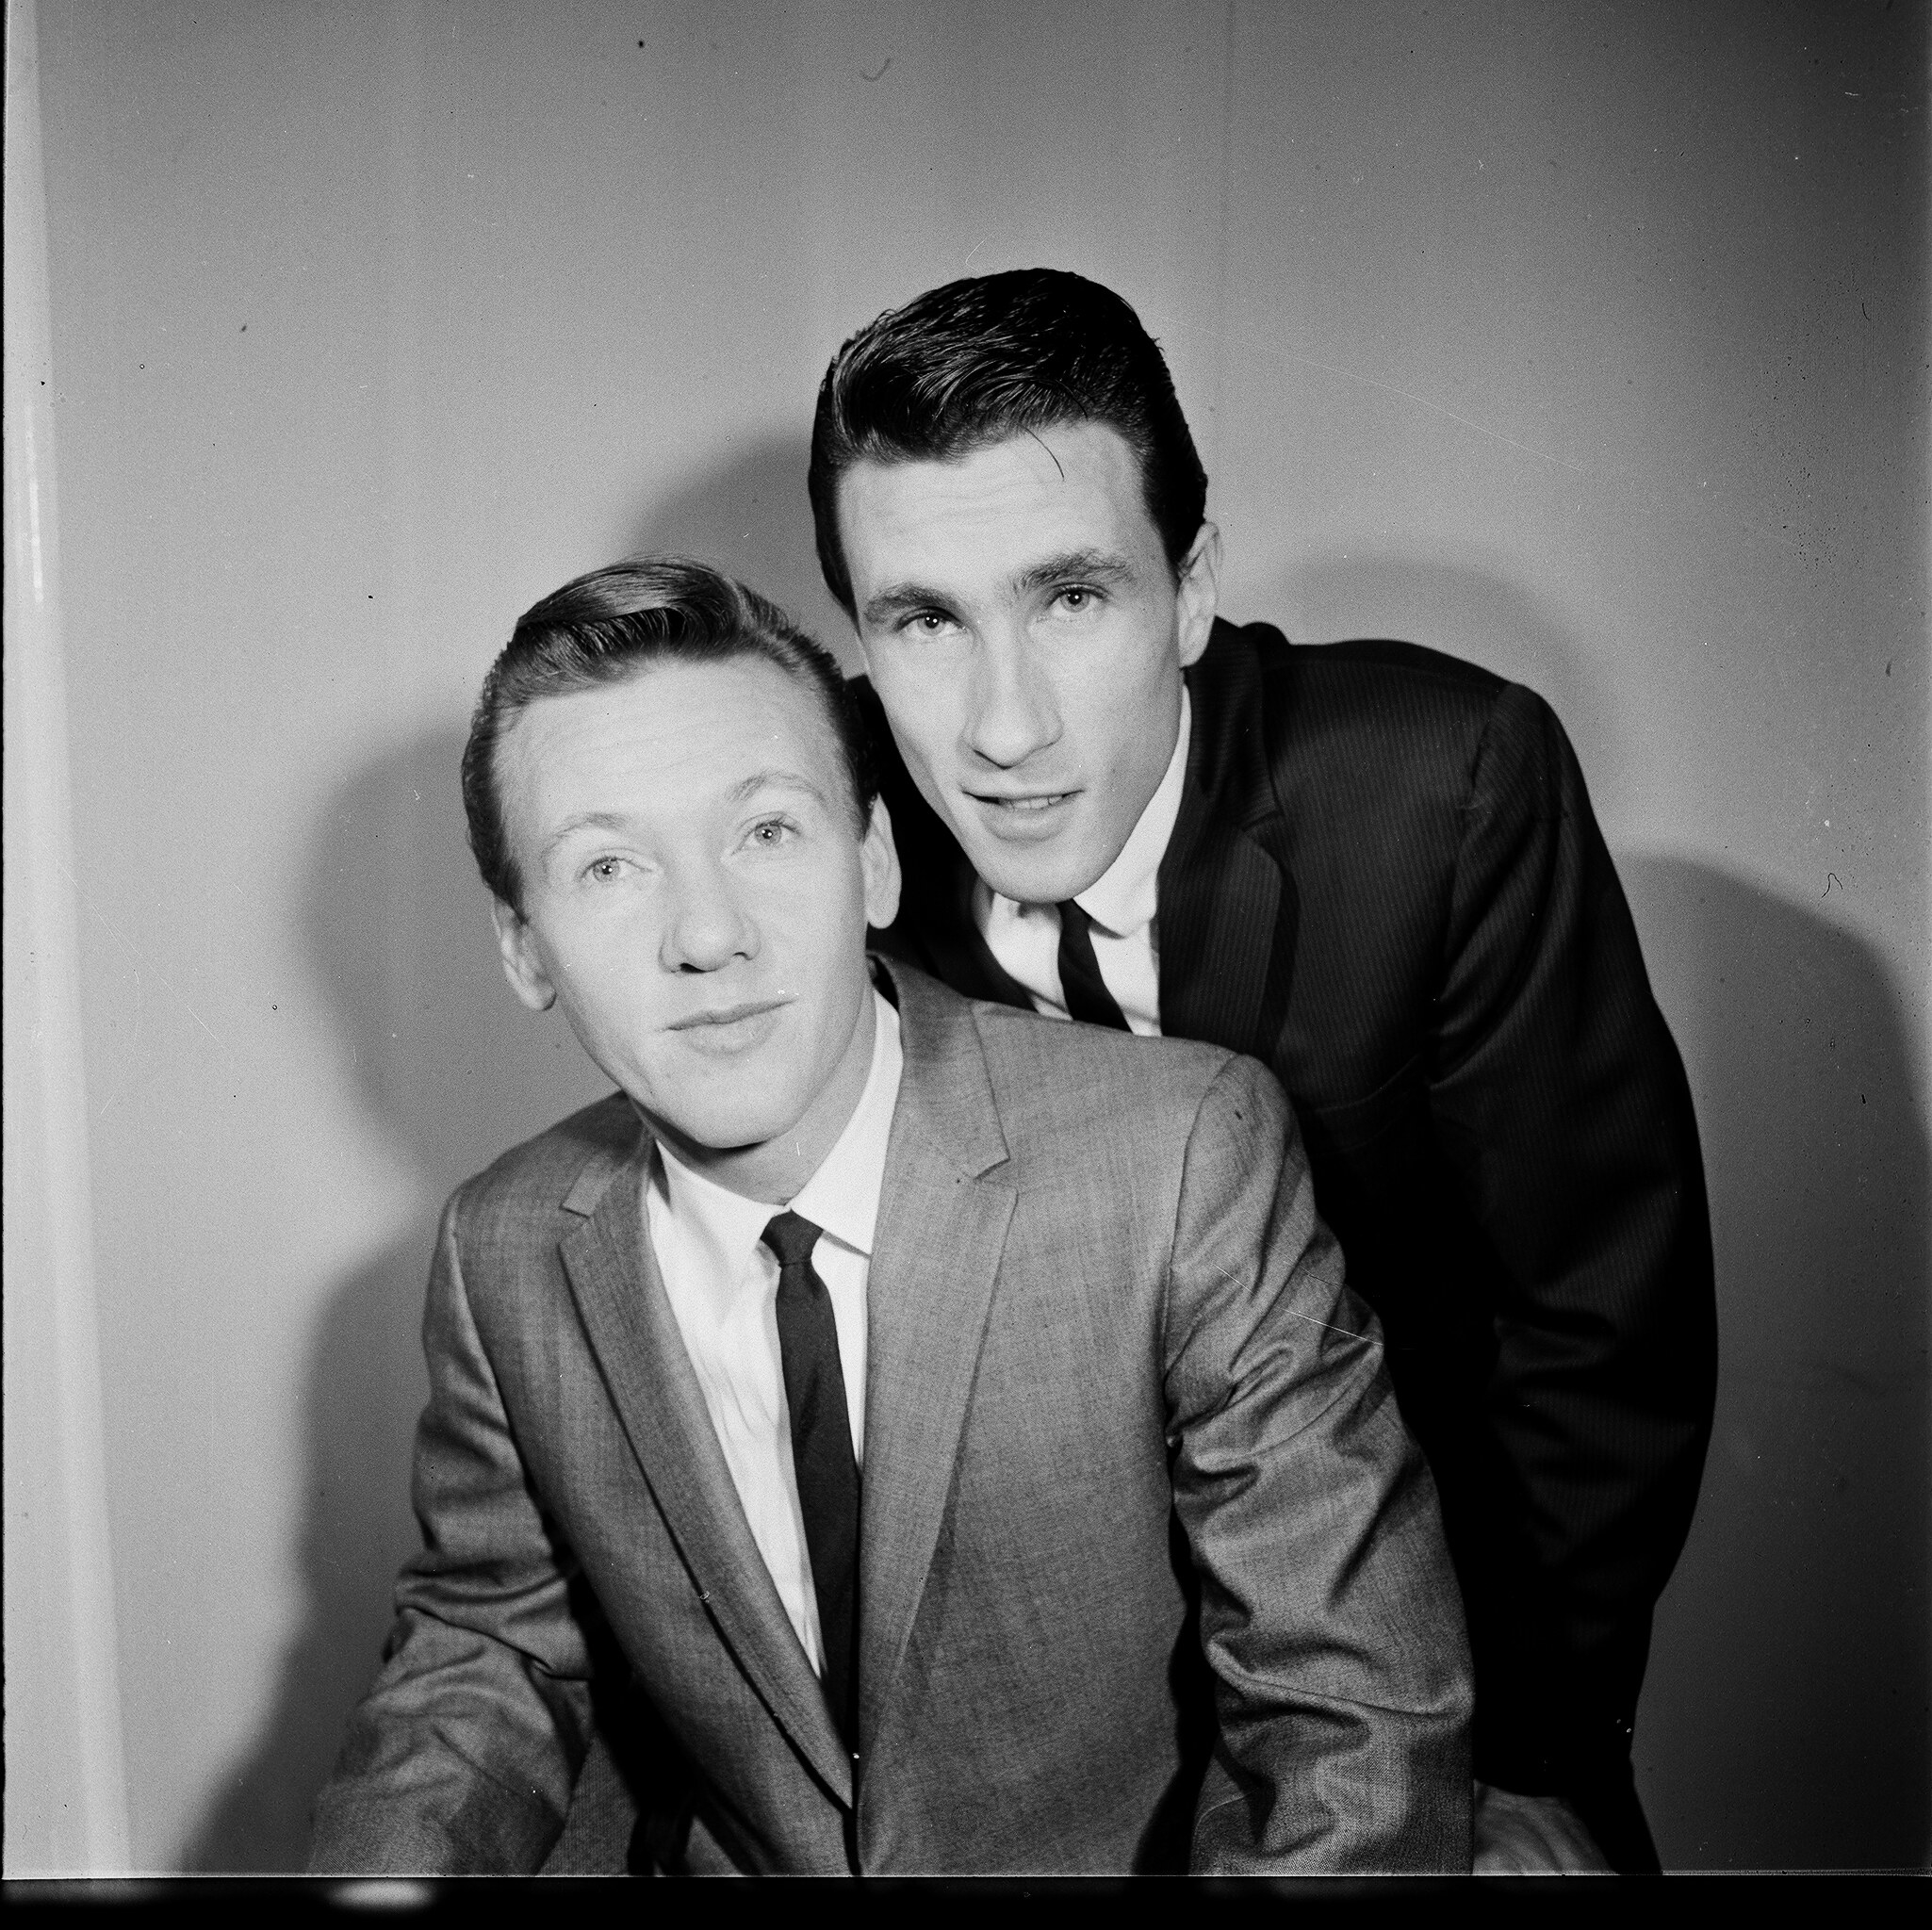 Bobby Hatfield and Bill Medley of The Righteous Brothers, backstage, London, 1965